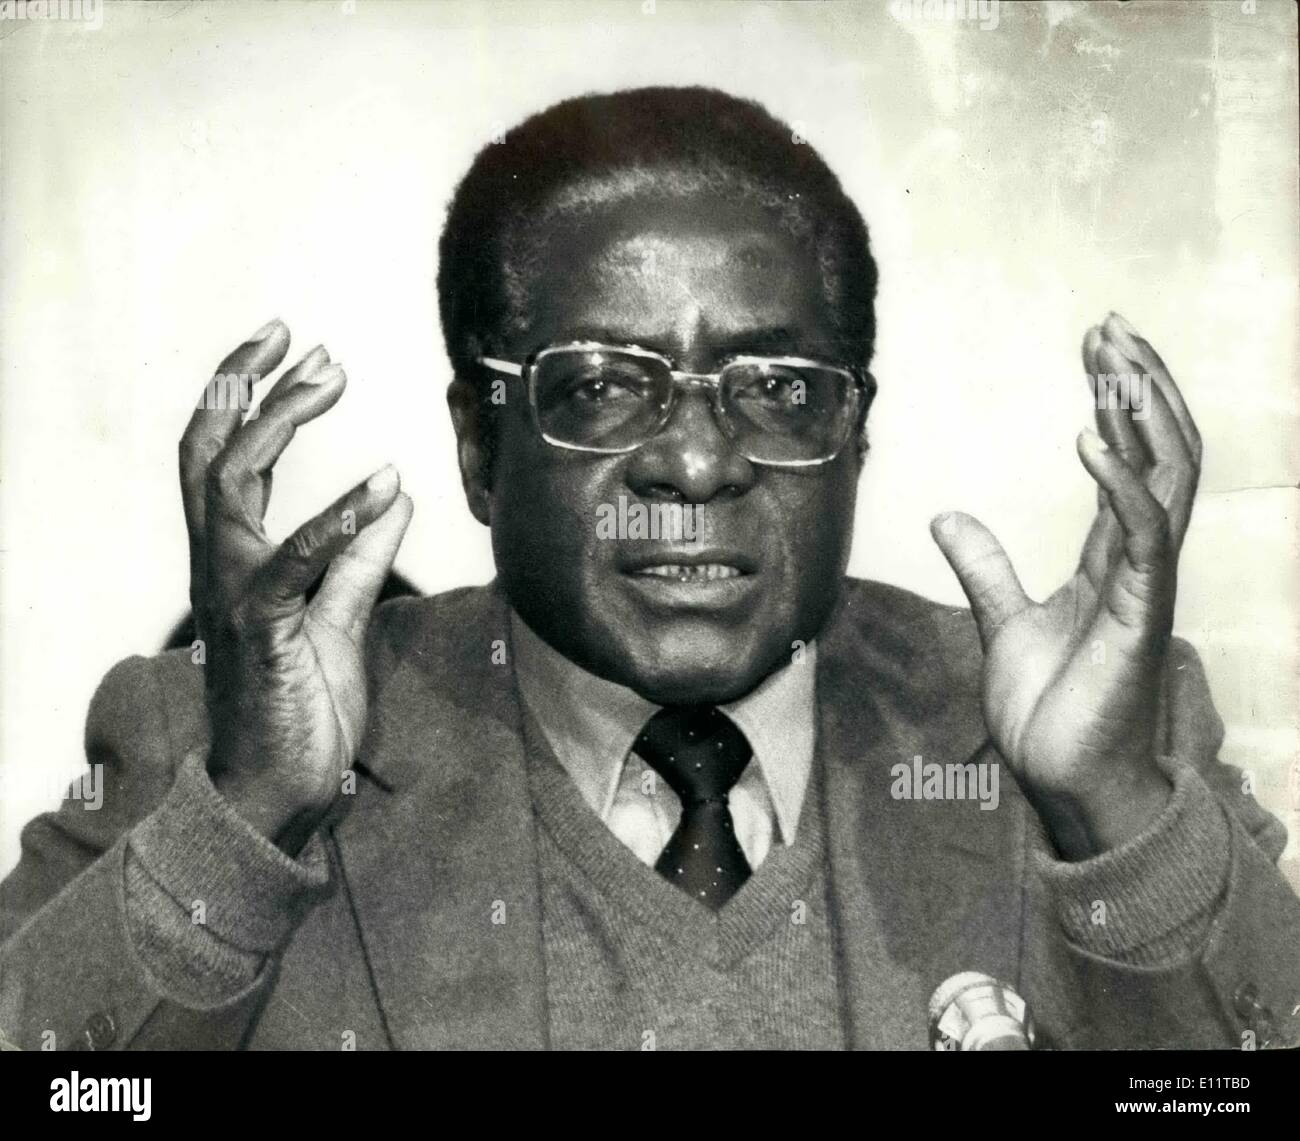 Mar. 03, 1980 - Zimbabwe in his hands Lord Soames, British Governor' today invited Robert Mugabe to form the first Government of Independent Zimbabwe, after his landslide victory. Stock Photo